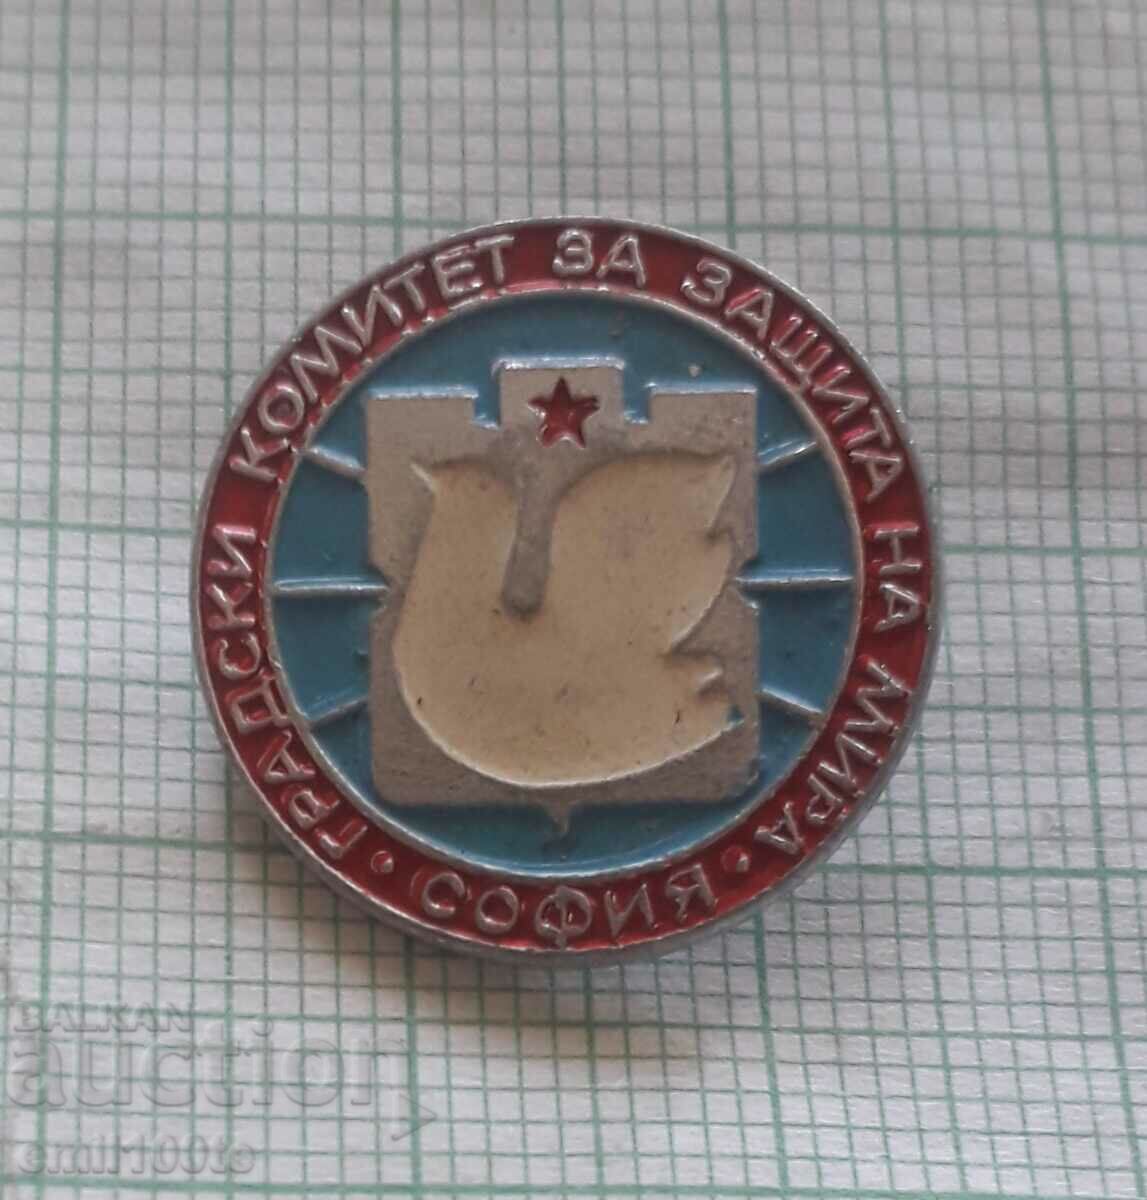 Badge - Sofia City Committee for the Protection of Peace